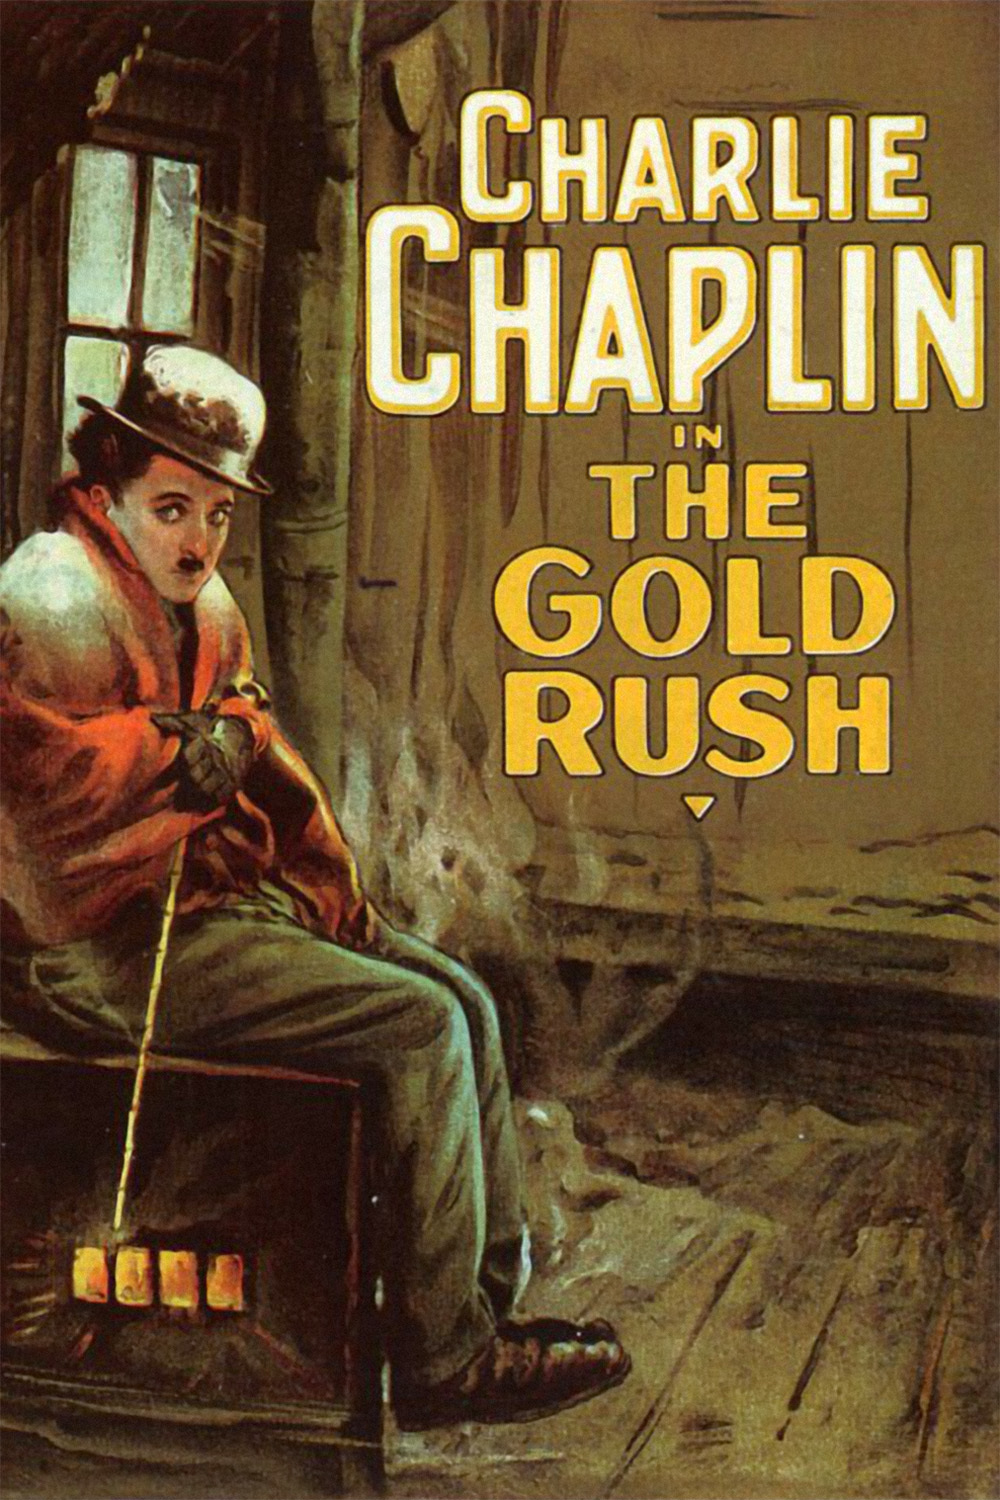 Poster for the movie "The Gold Rush"